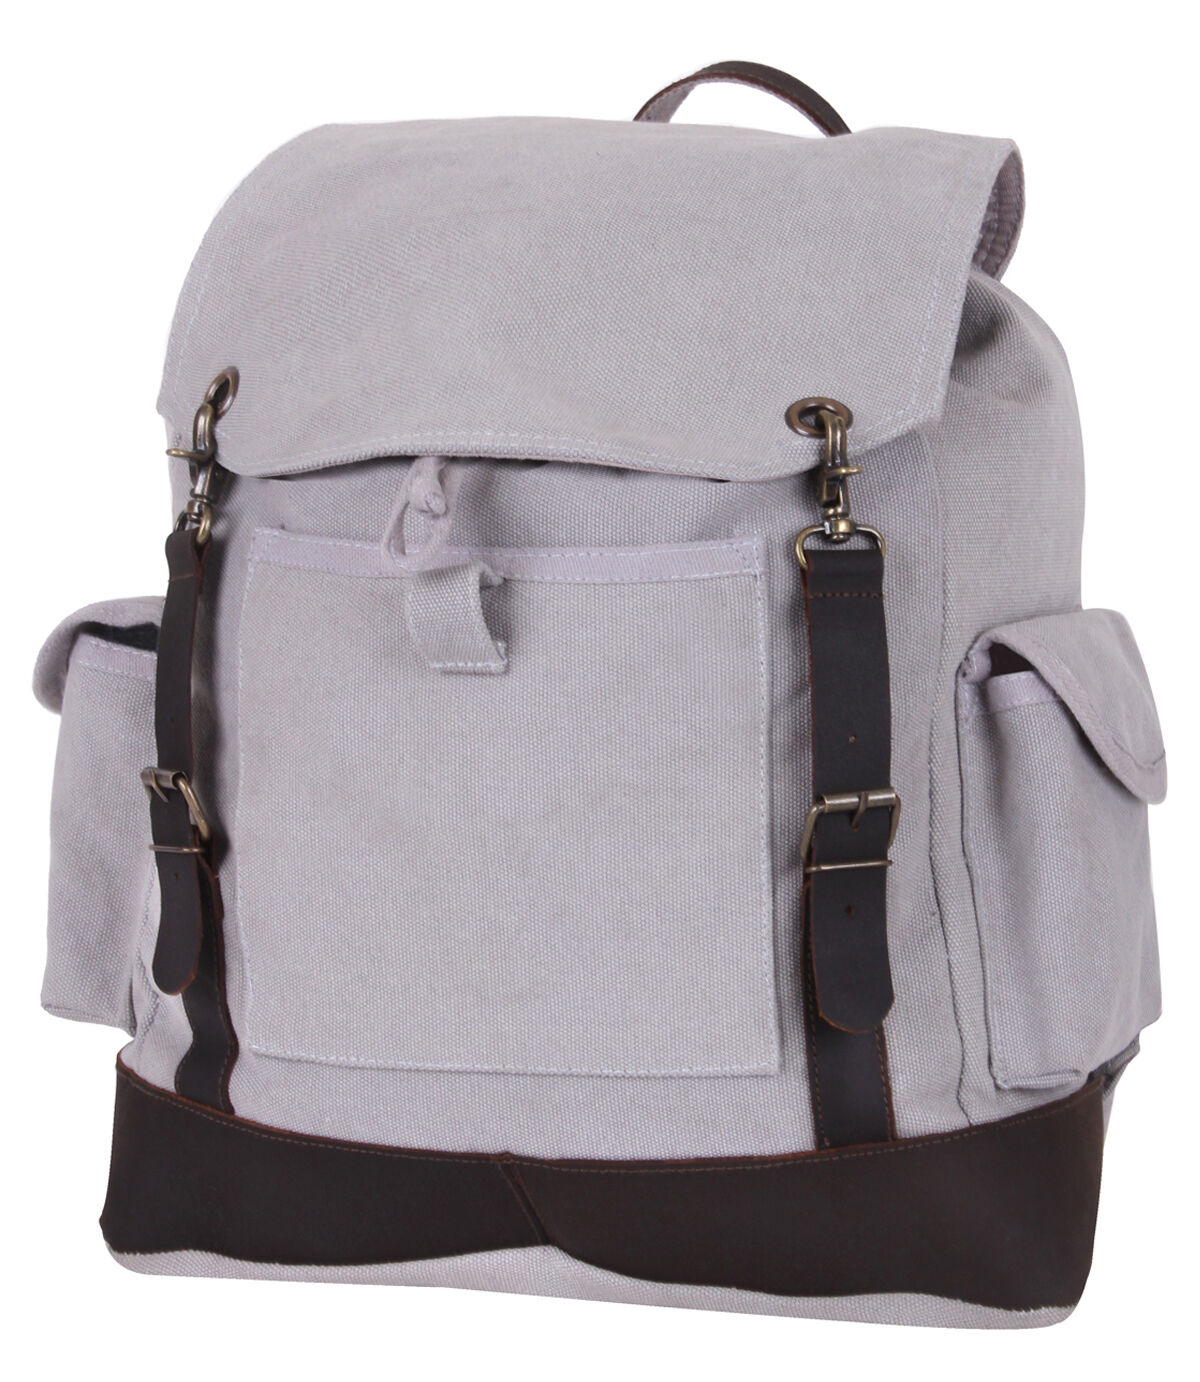 Rothco Vintage Expedition Rucksack - Multiple Colors